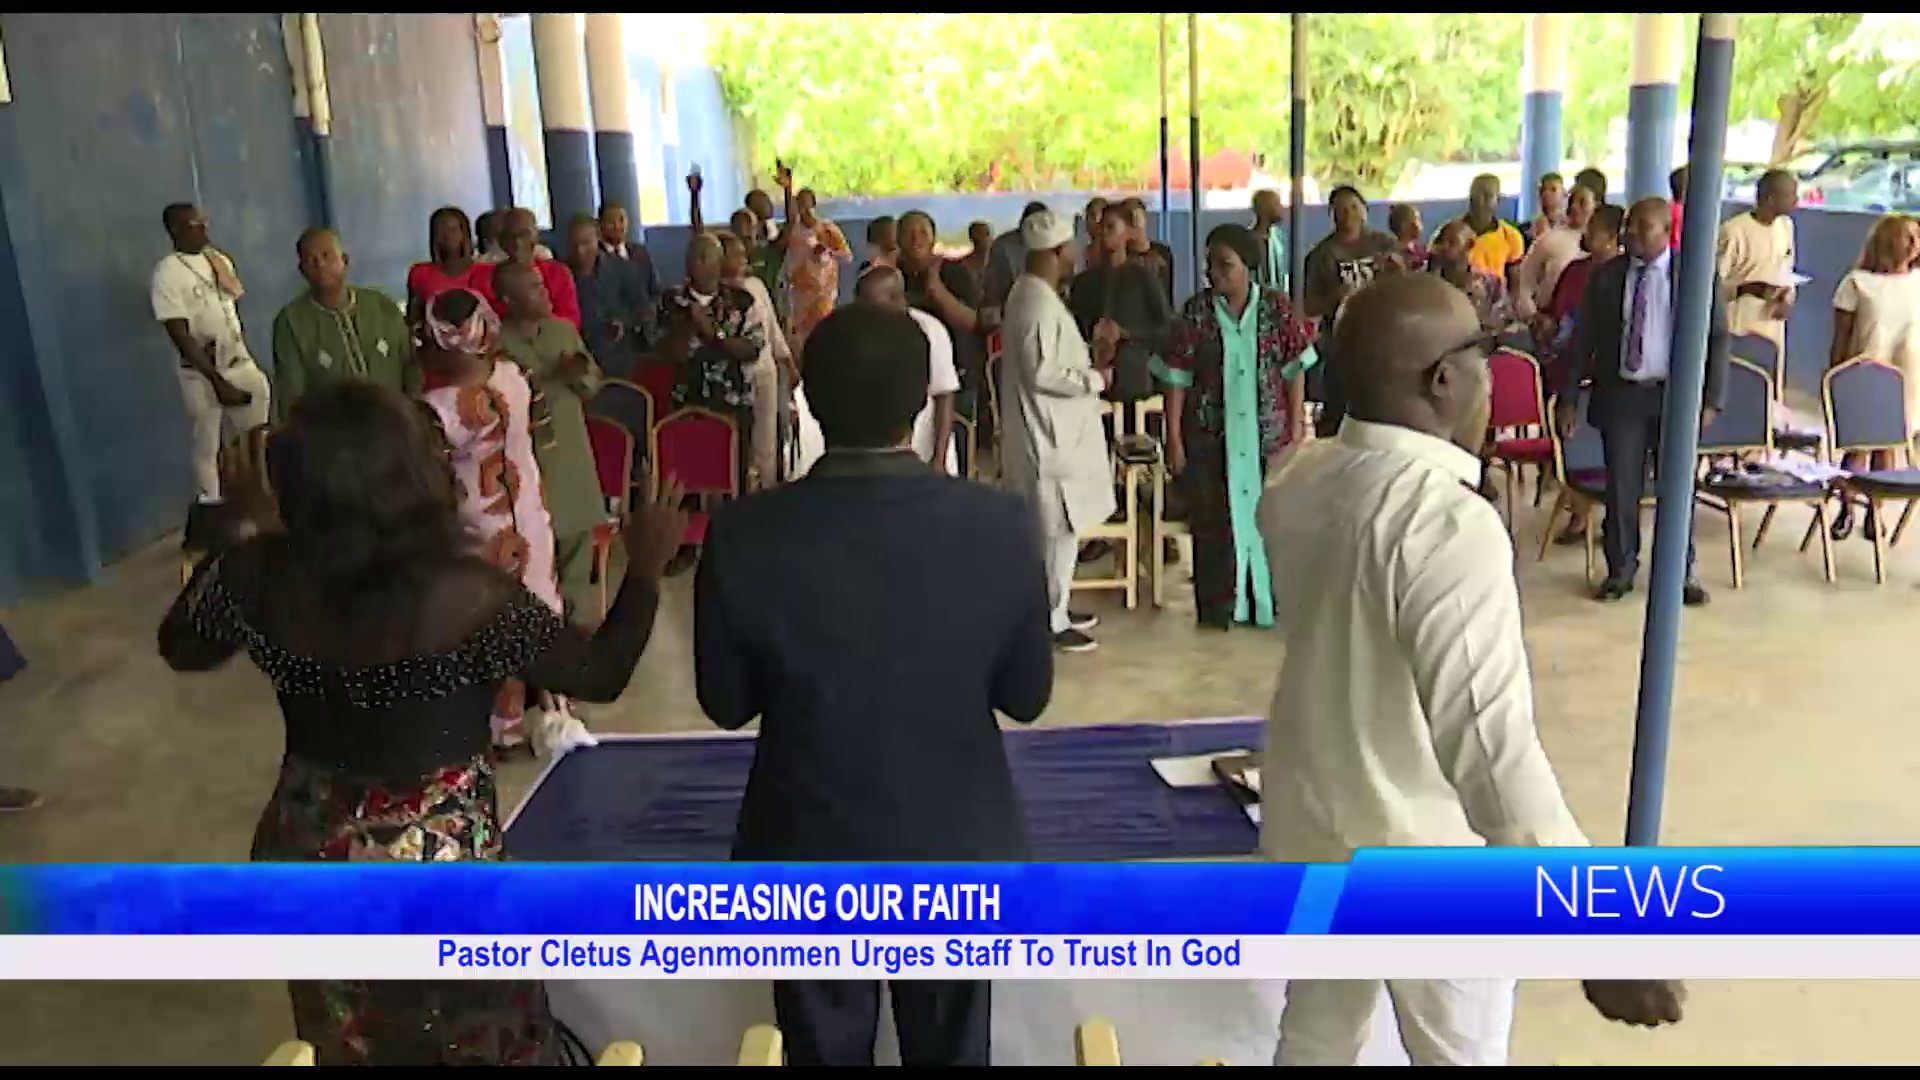 Increasing Our Faith: Pastor Cletus Agenmonmen Urges Staff To Trust In God